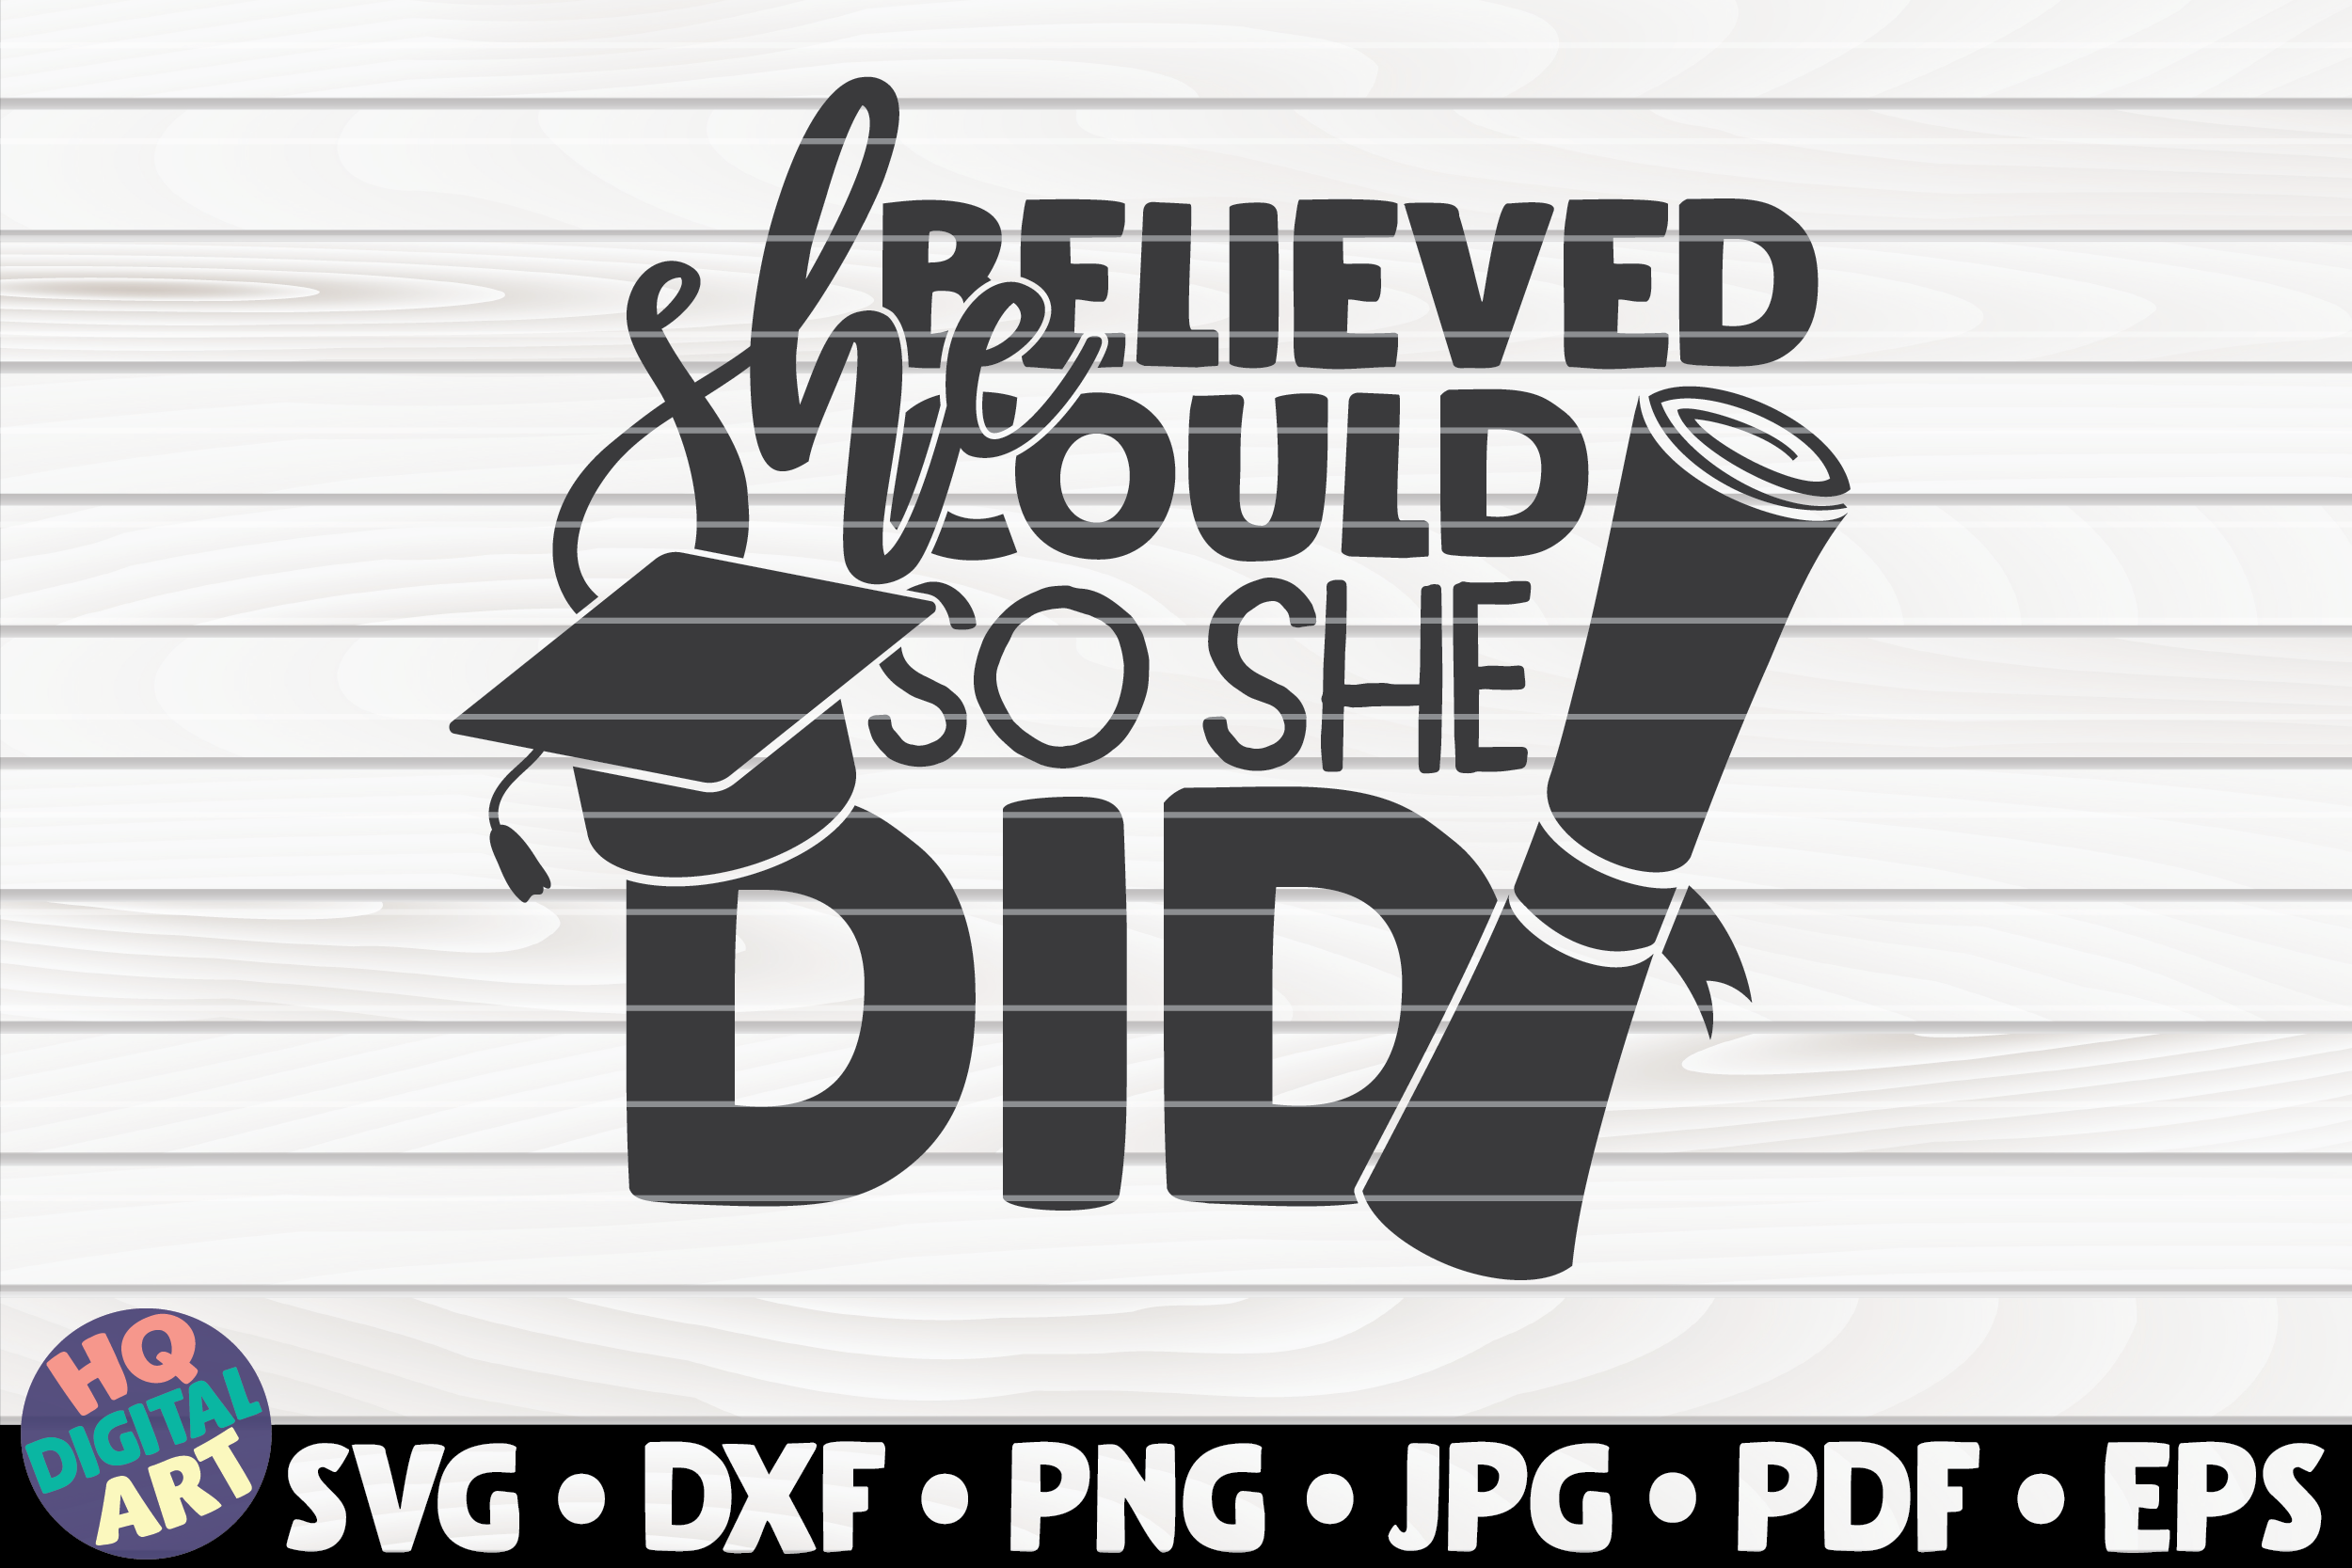 Download She Believed She Could So She Did Svg Graduation Quote By Hqdigitalart Thehungryjpeg Com